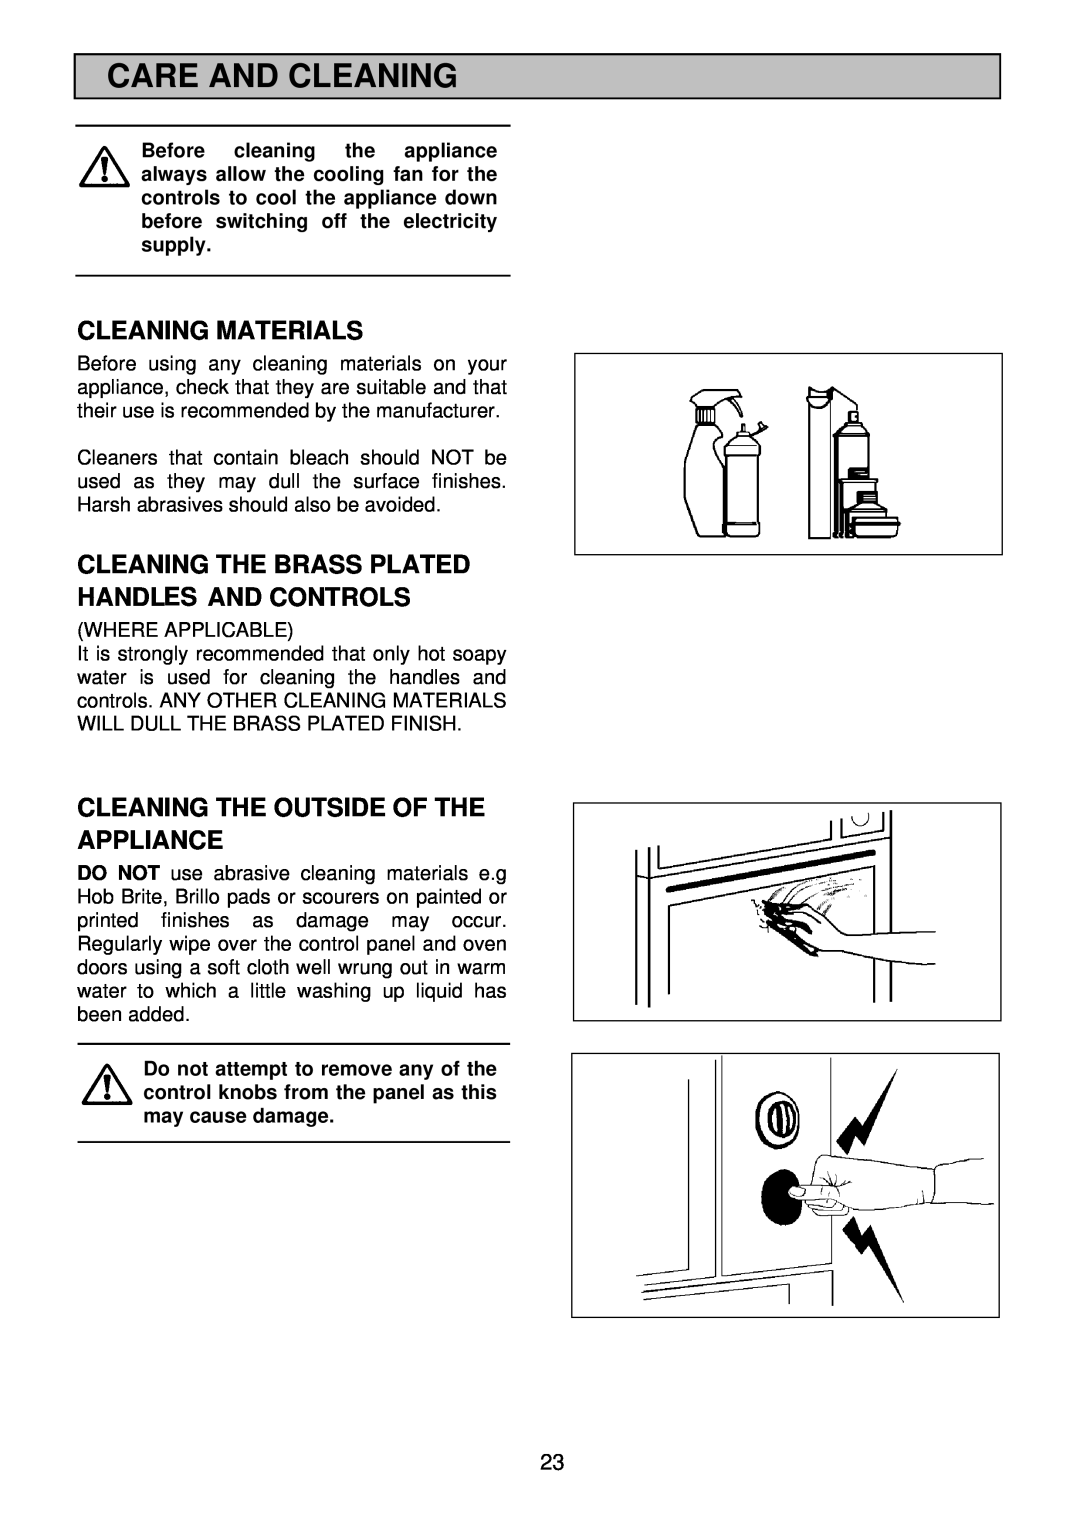 Electrolux EDB705 manual Care And Cleaning, Cleaning Materials, Cleaning The Outside Of The Appliance 